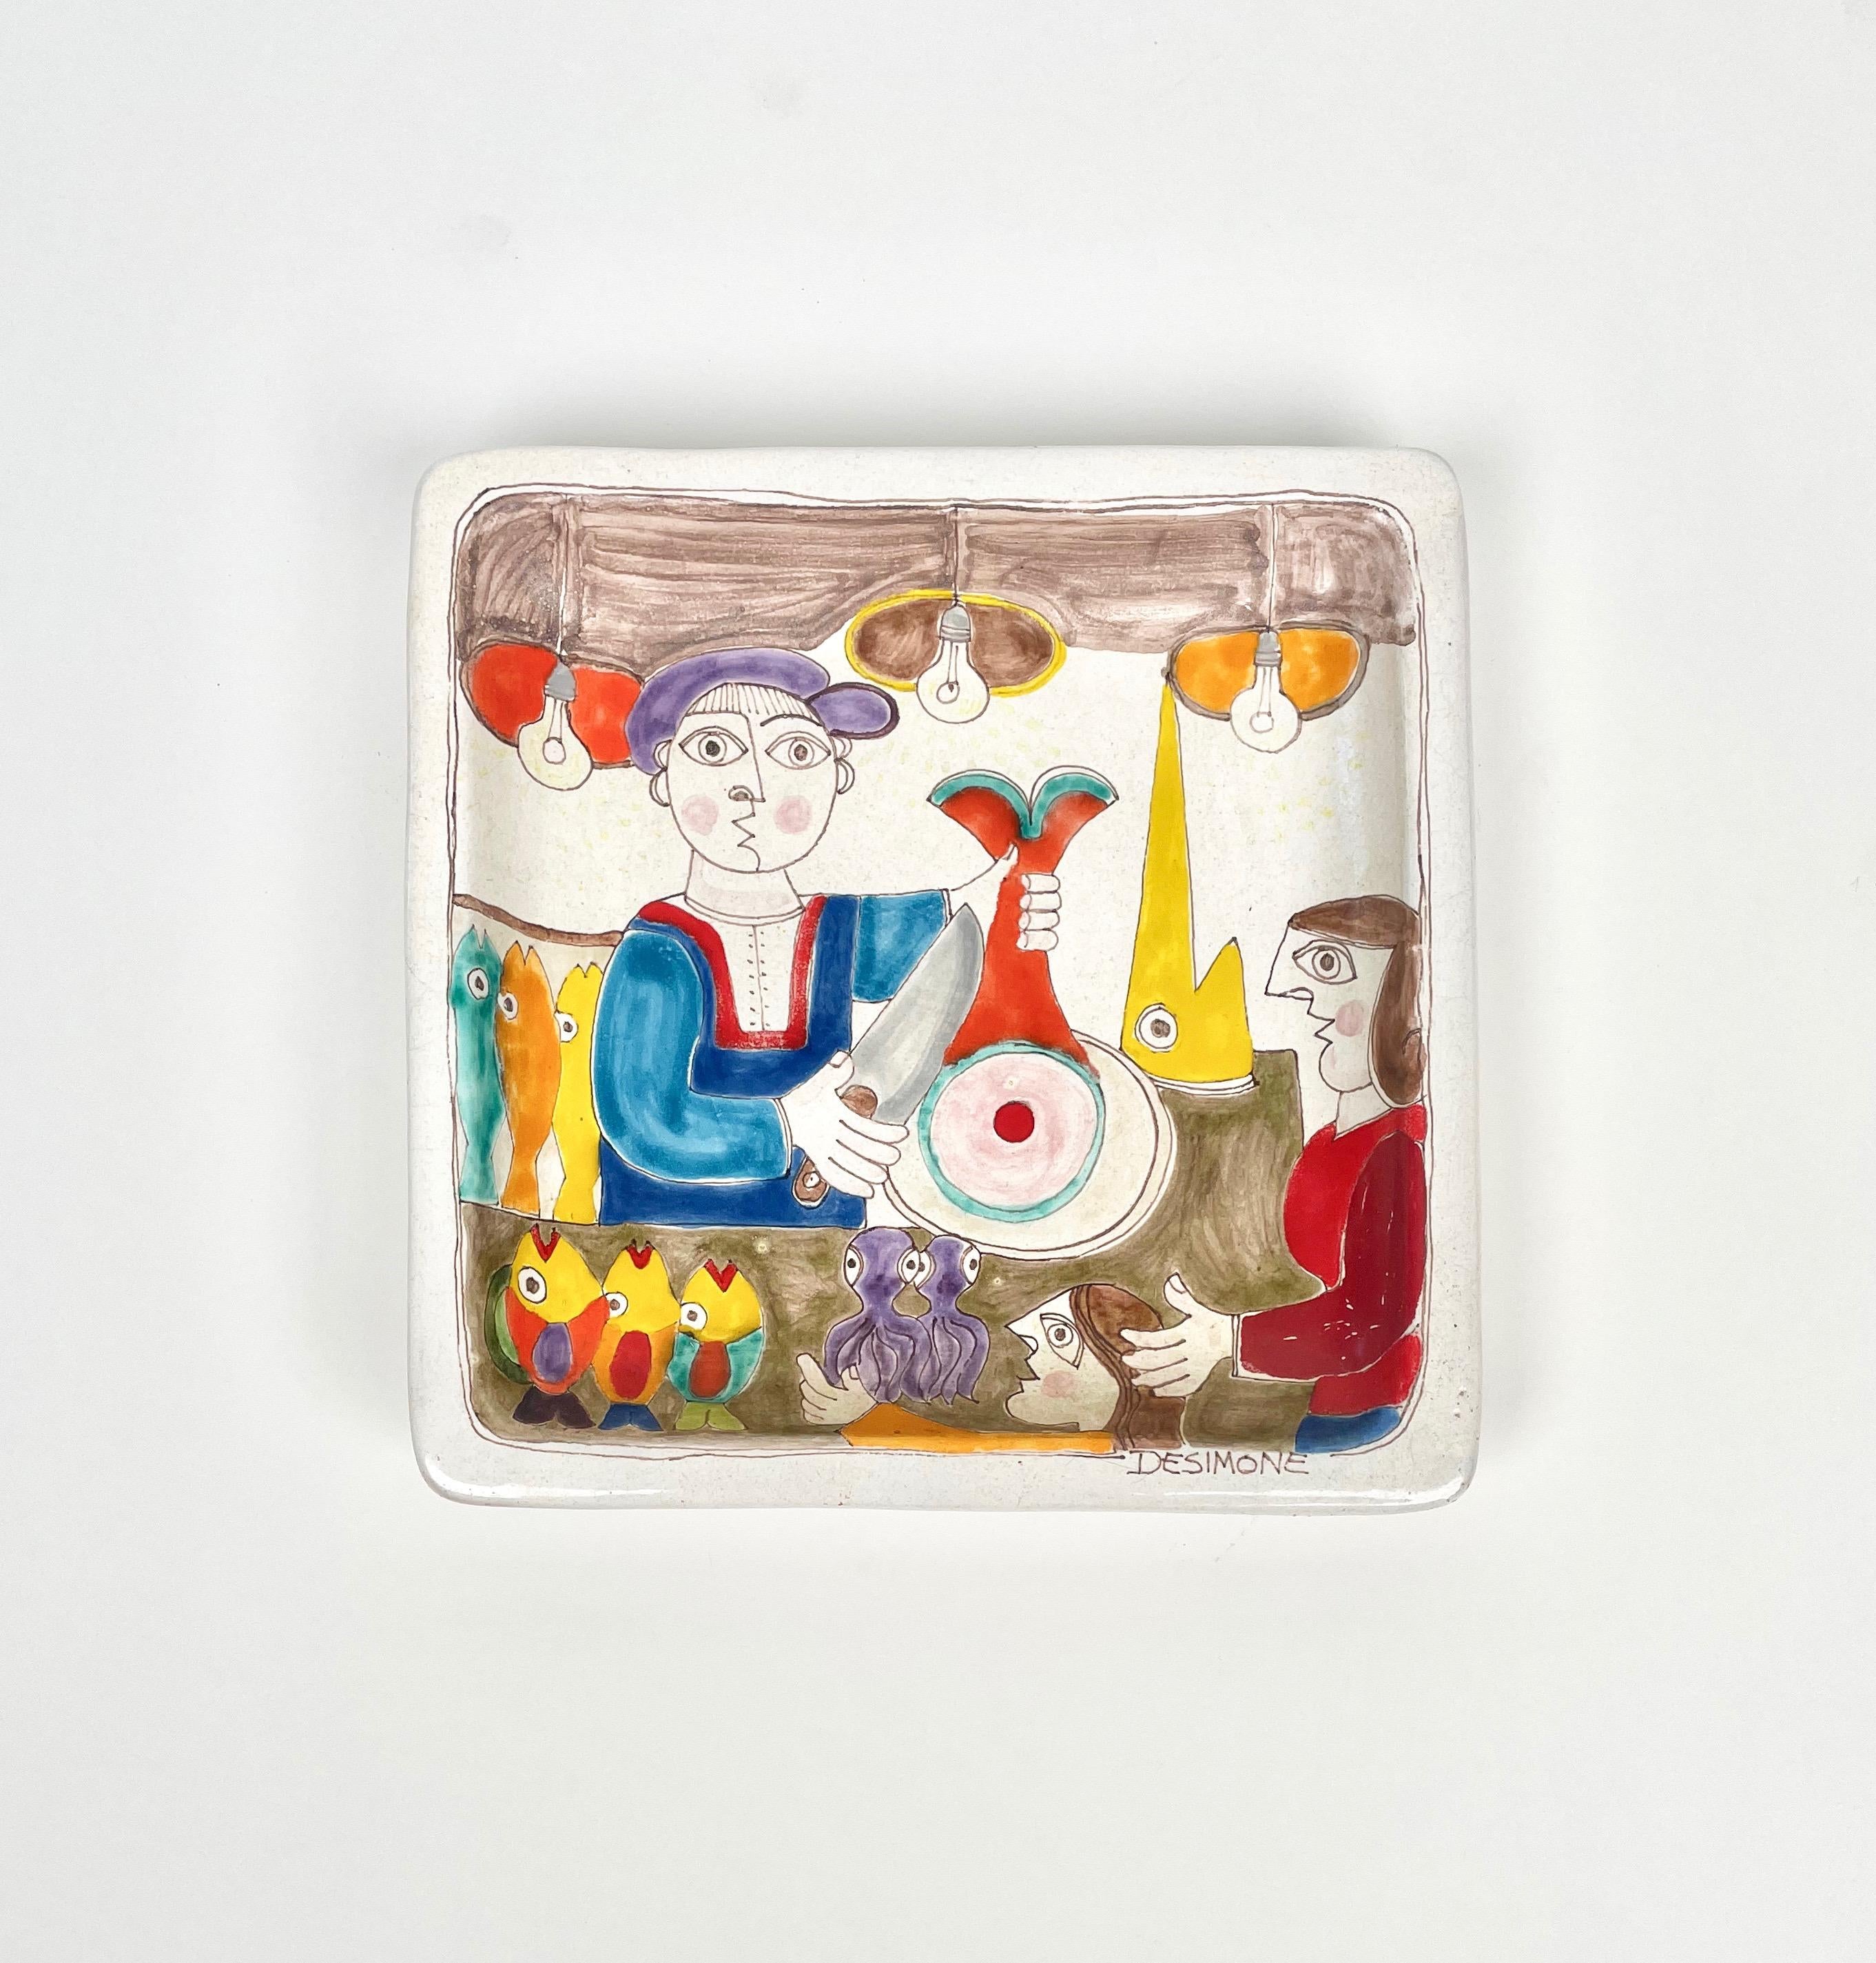 Beautiful squared   wall mounted tile platen or vide-poche in colored ceramic by the Italian artisti Giovanni De Simone.

Giovanni De Simone was a great Sicilian artist from Palermo whose style was inspired by Pablo Picasso paintings.   

Made in